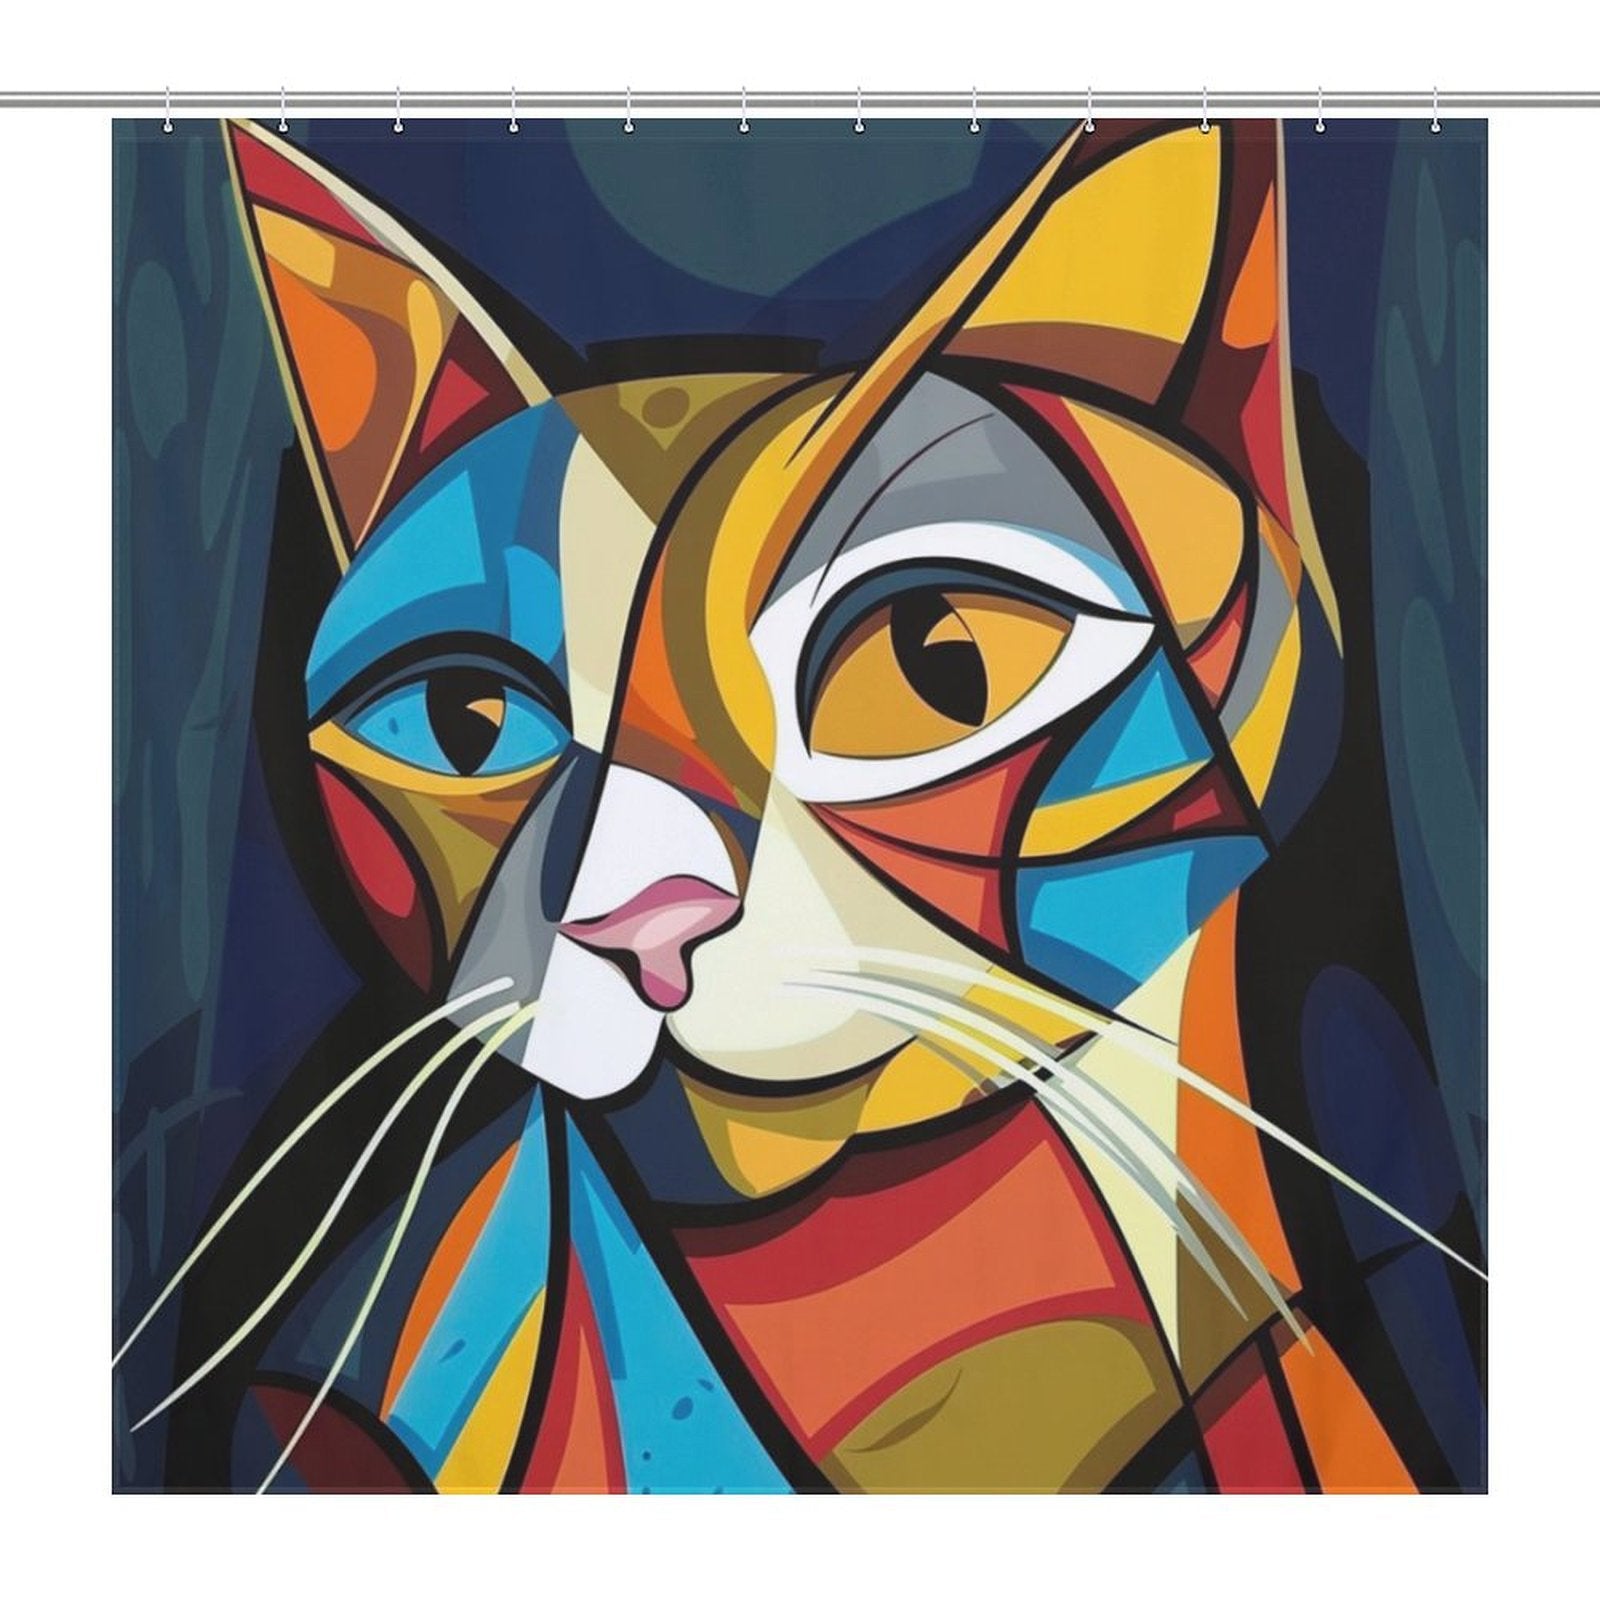 Cubist-style cat painting with geometric shapes and bold colors, featuring blue, yellow, orange, and red hues—perfect for an Abstract Geometric Vintage Colorful Modern Art Minimalist Mid Century Cat Shower Curtain-Cottoncat by Cotton Cat.